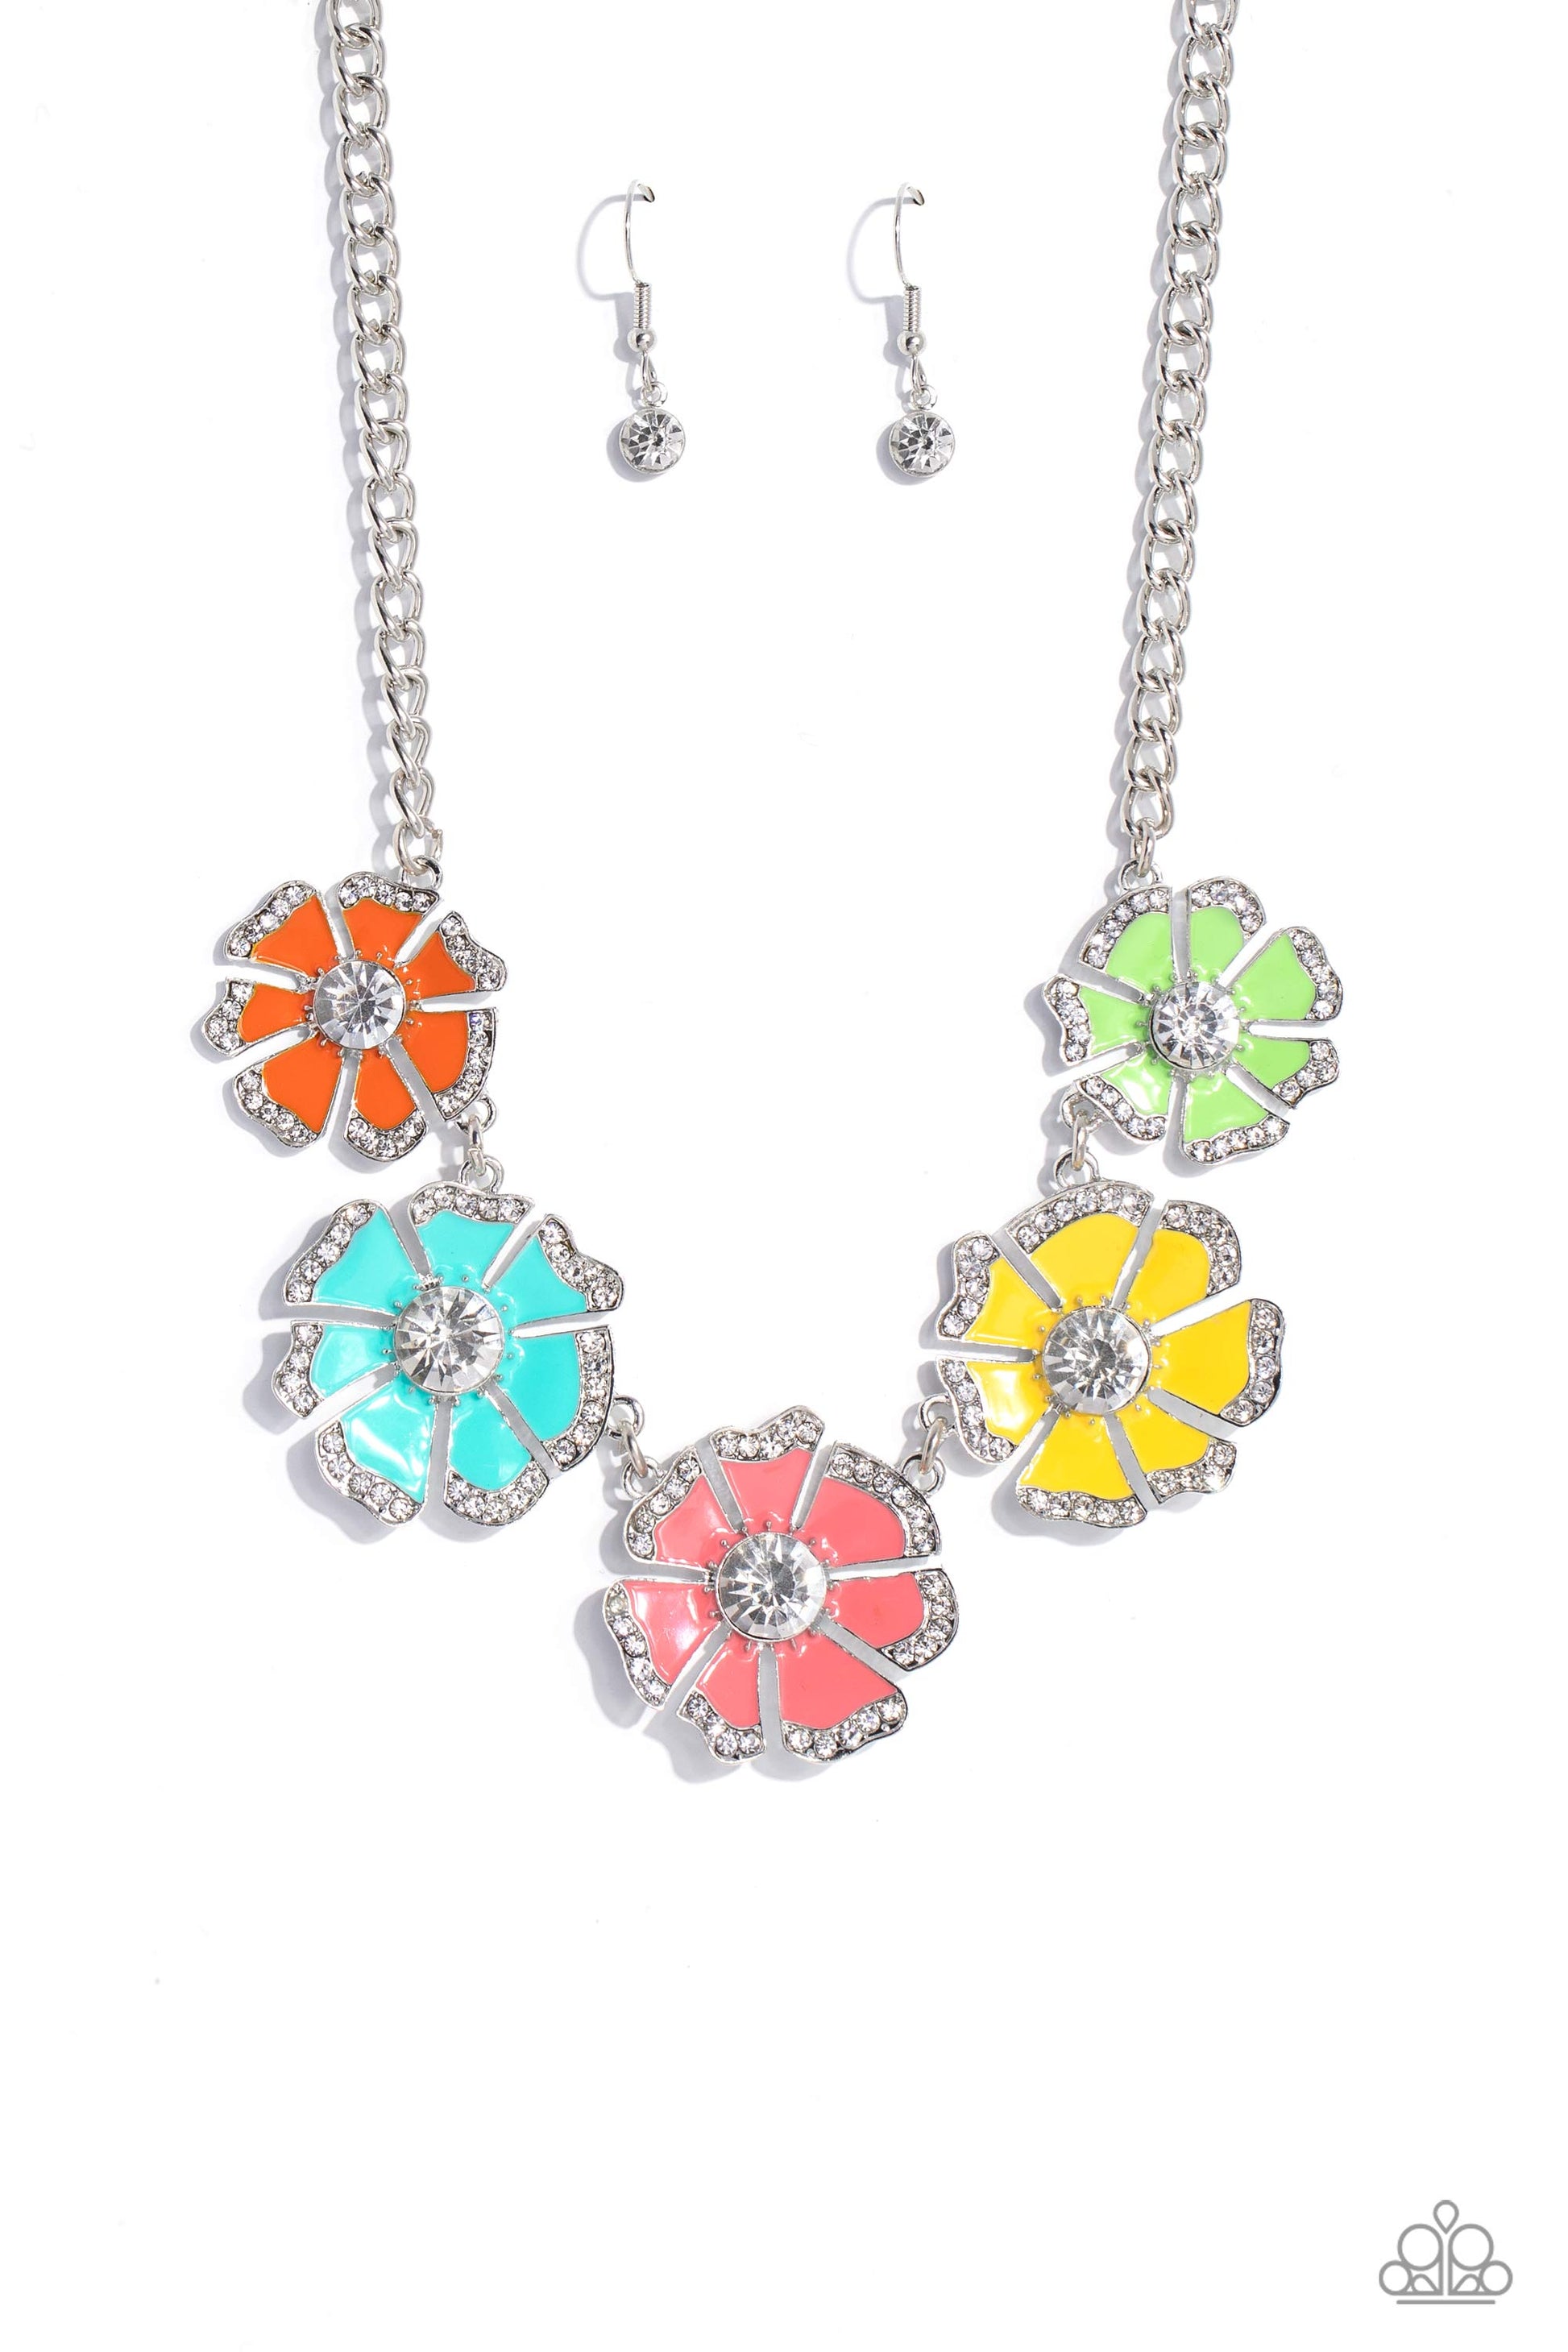 Dotted with dainty white rhinestone petal edges and white gem centers, a vibrant assortment of Burnt Coral, Samoan Sun, Orange Tiger, apple green, and tiffany blue flowers link below the collar for a playful pop of color. Features an adjustable clasp closure.  Sold as one individual necklace. Includes one pair of matching earrings.